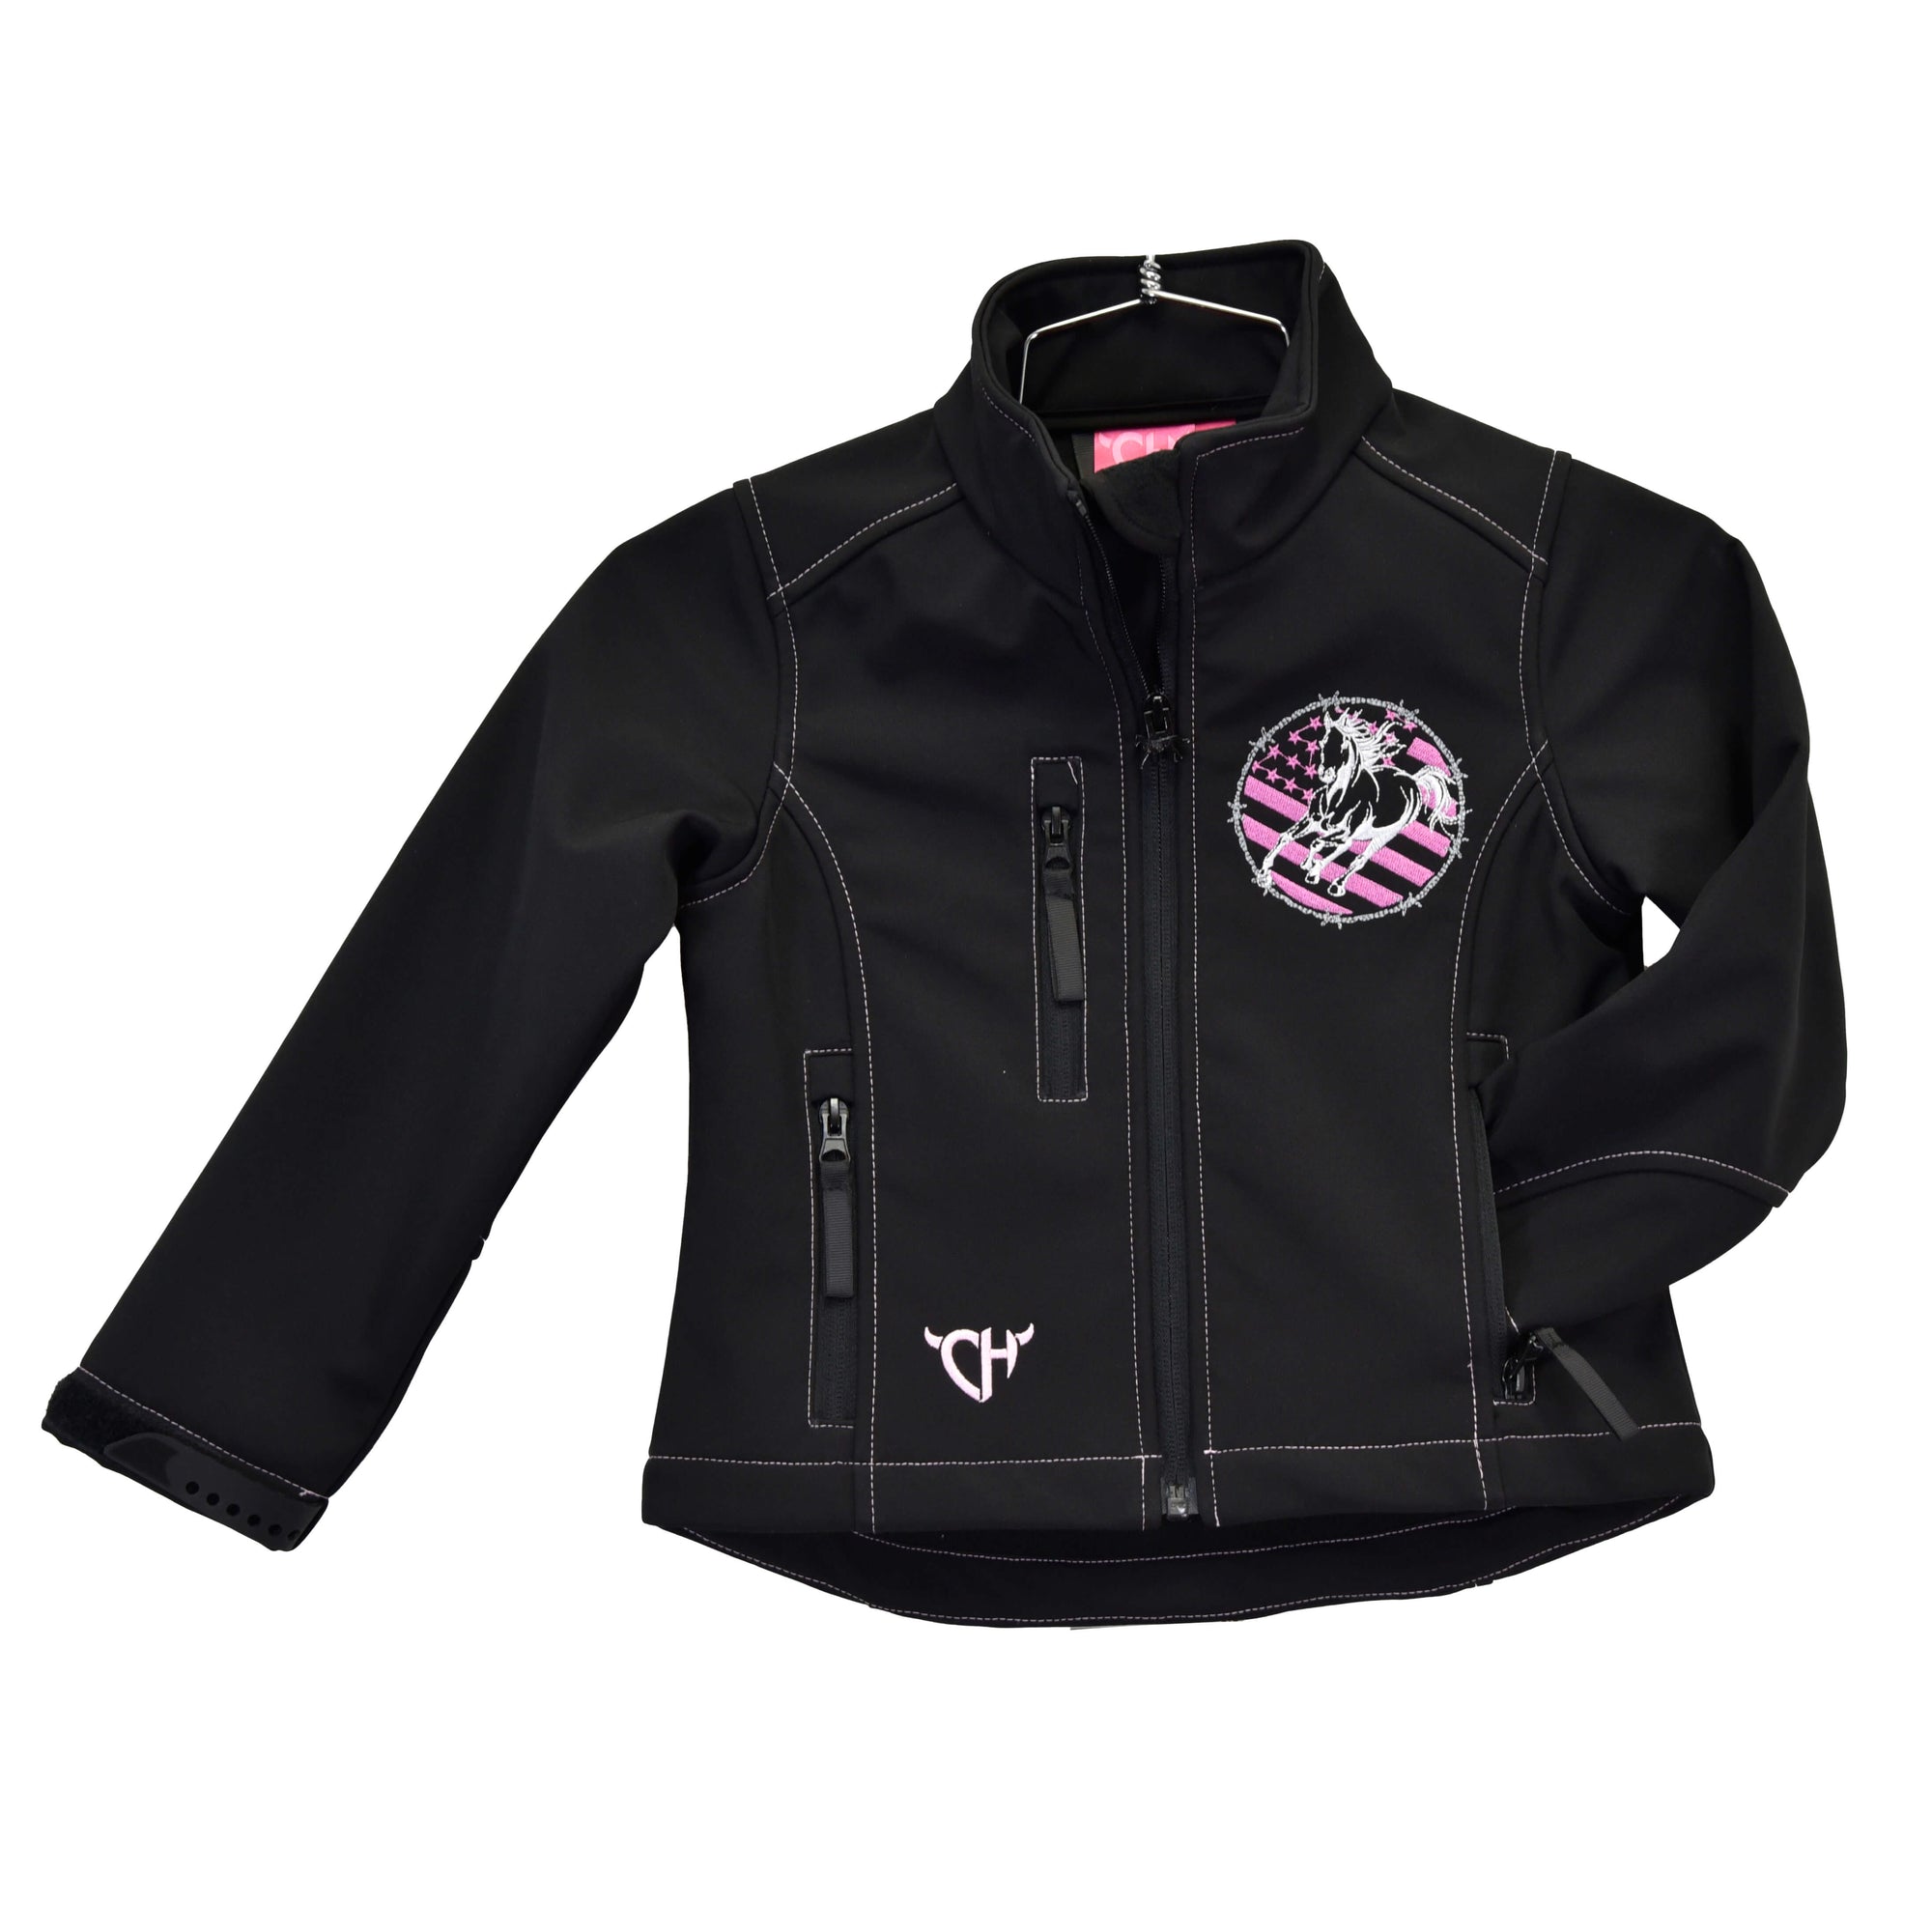 Toddler Girl's Cowgirl Hardware Black with Pink accents Cowgirl Nation Poly Shell Jacket from Cowboy Hardware